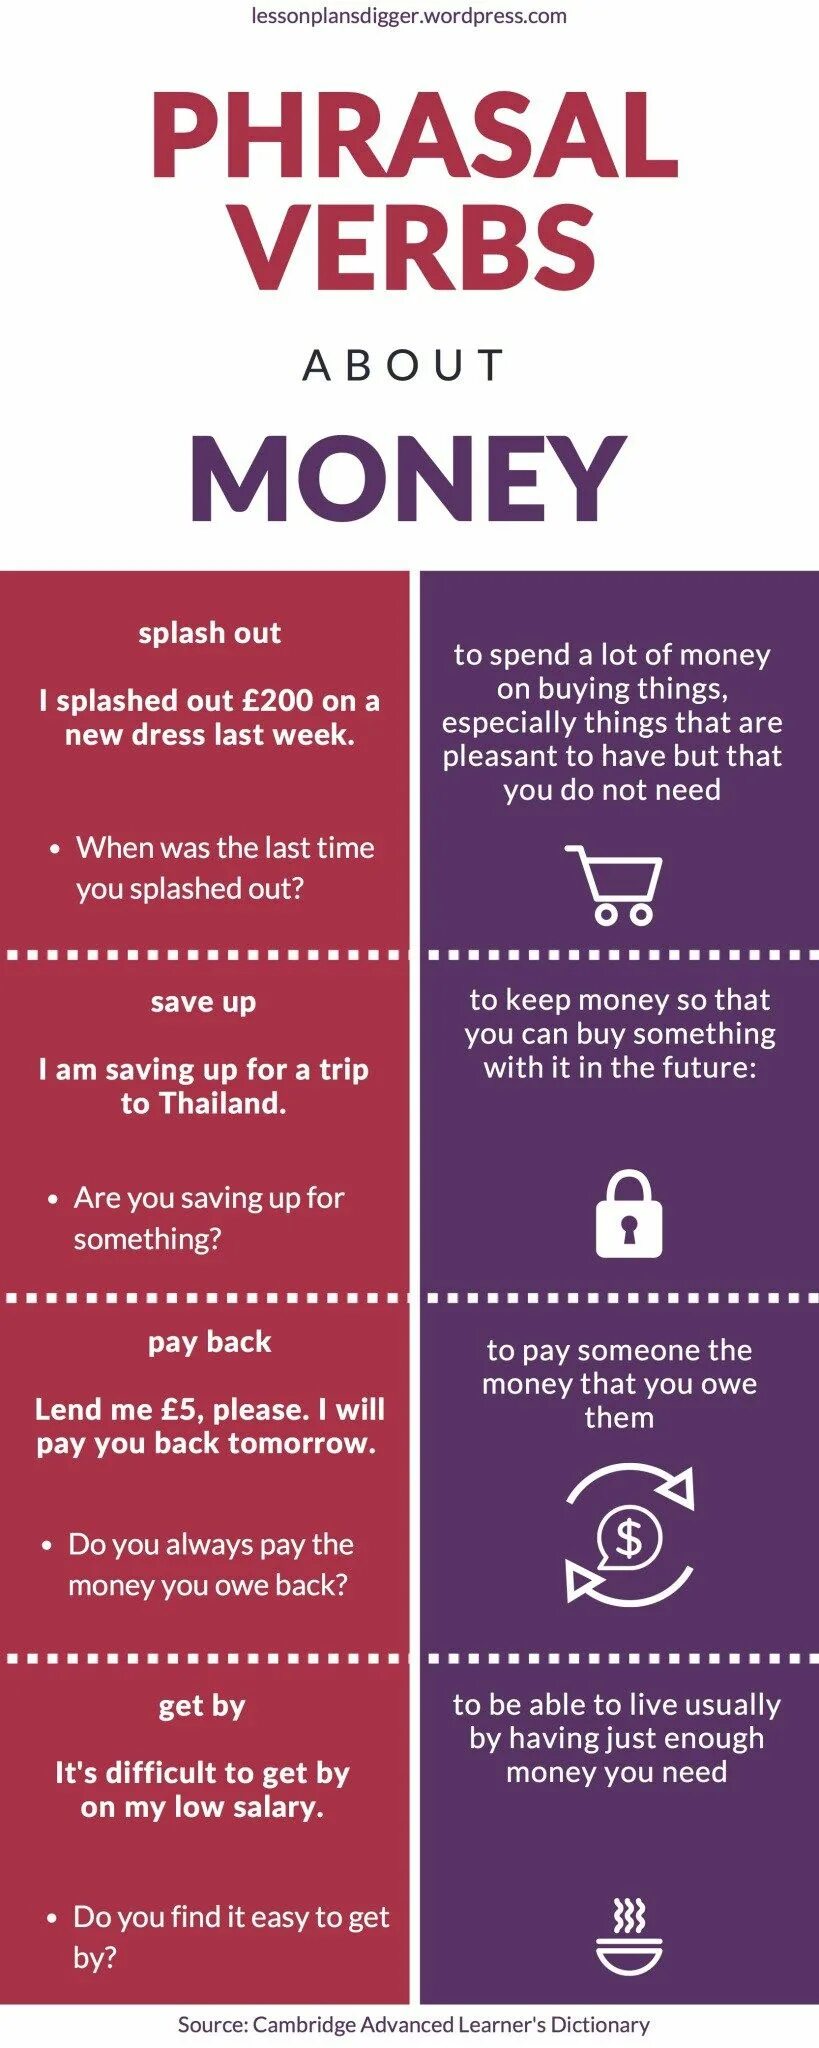 Money Phrasal verbs. Interesting facts about money. Verbs with money. Phrasal verbs about shopping and money. Phrasal verbs shopping